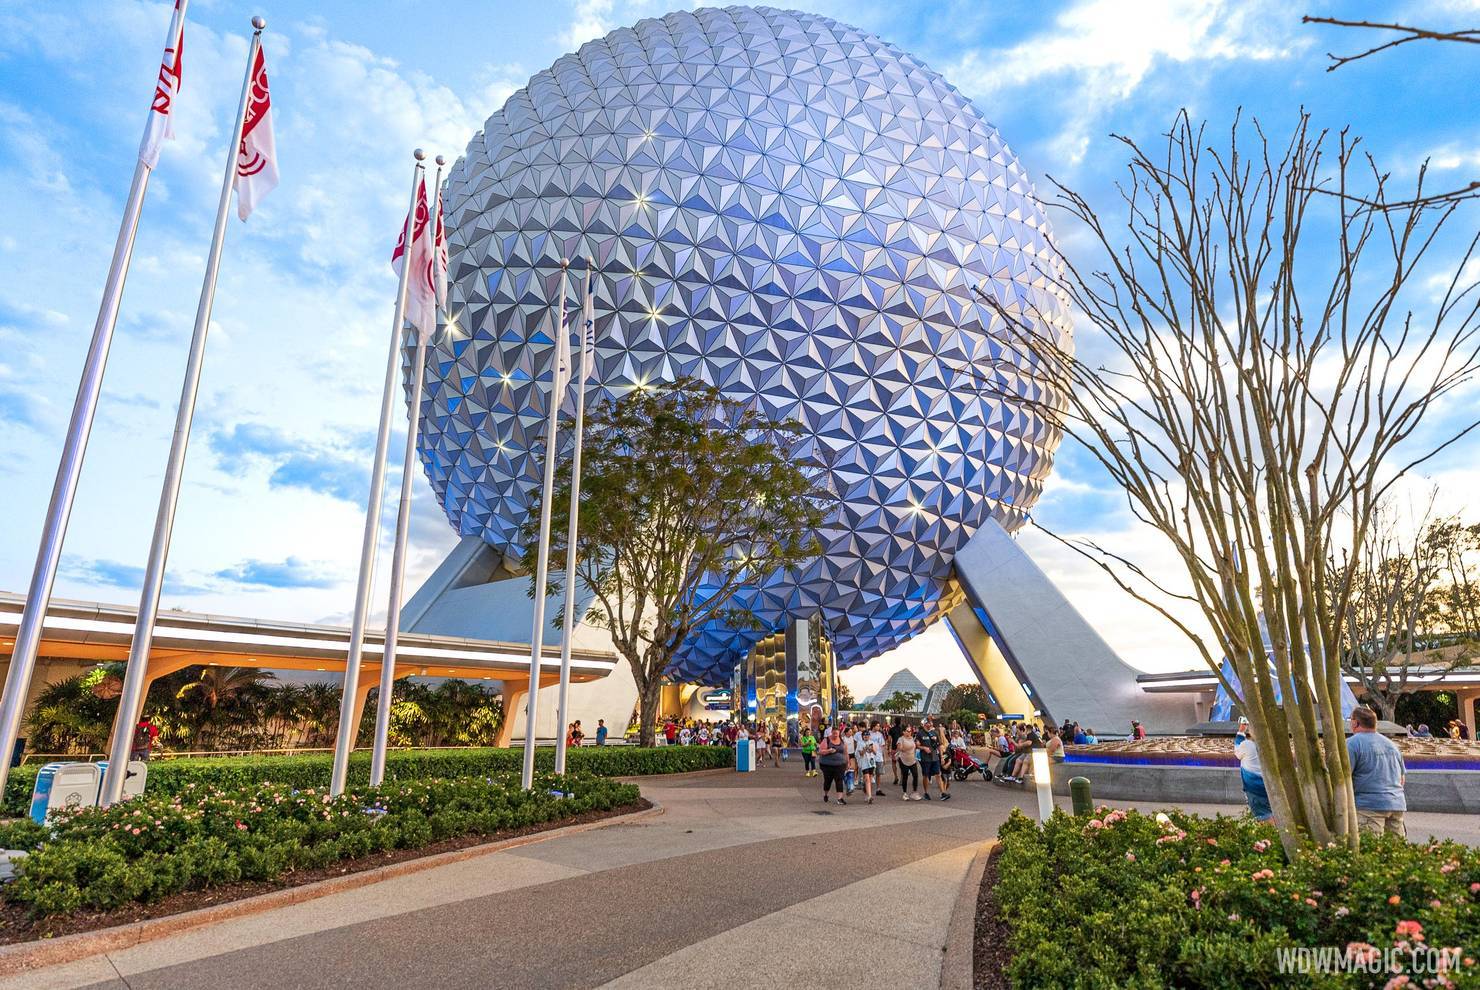 Most of Disney's reservations systems will be unavailable during the early hours on March 25